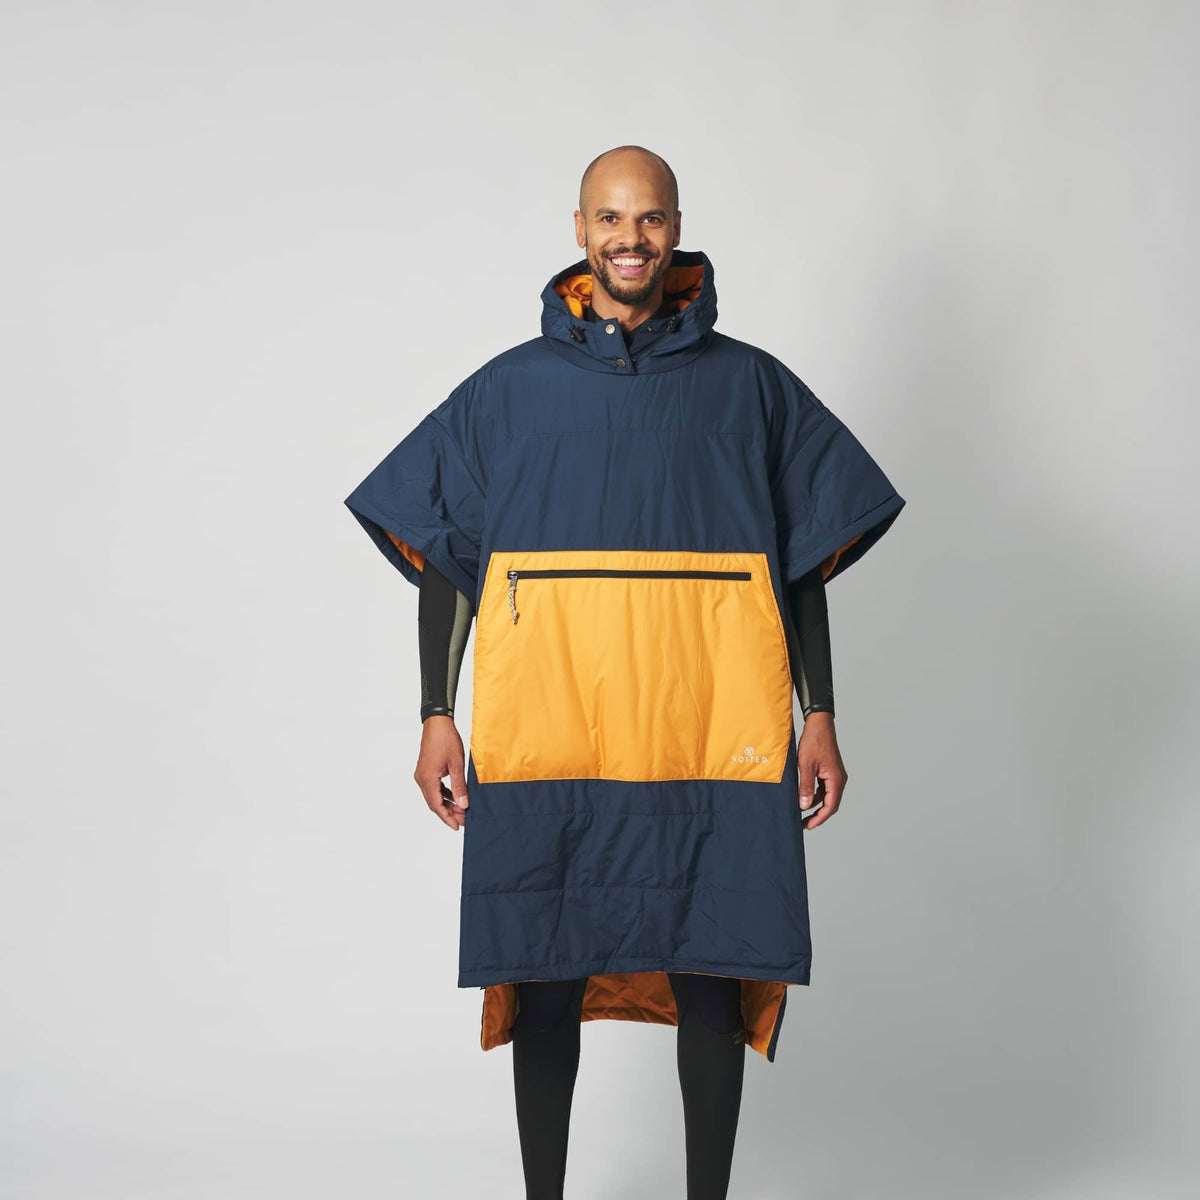 VOITED Outdoor Poncho for Surfing, Camping, Vanlife & Wild Swimming - Marsh Grey / Desert